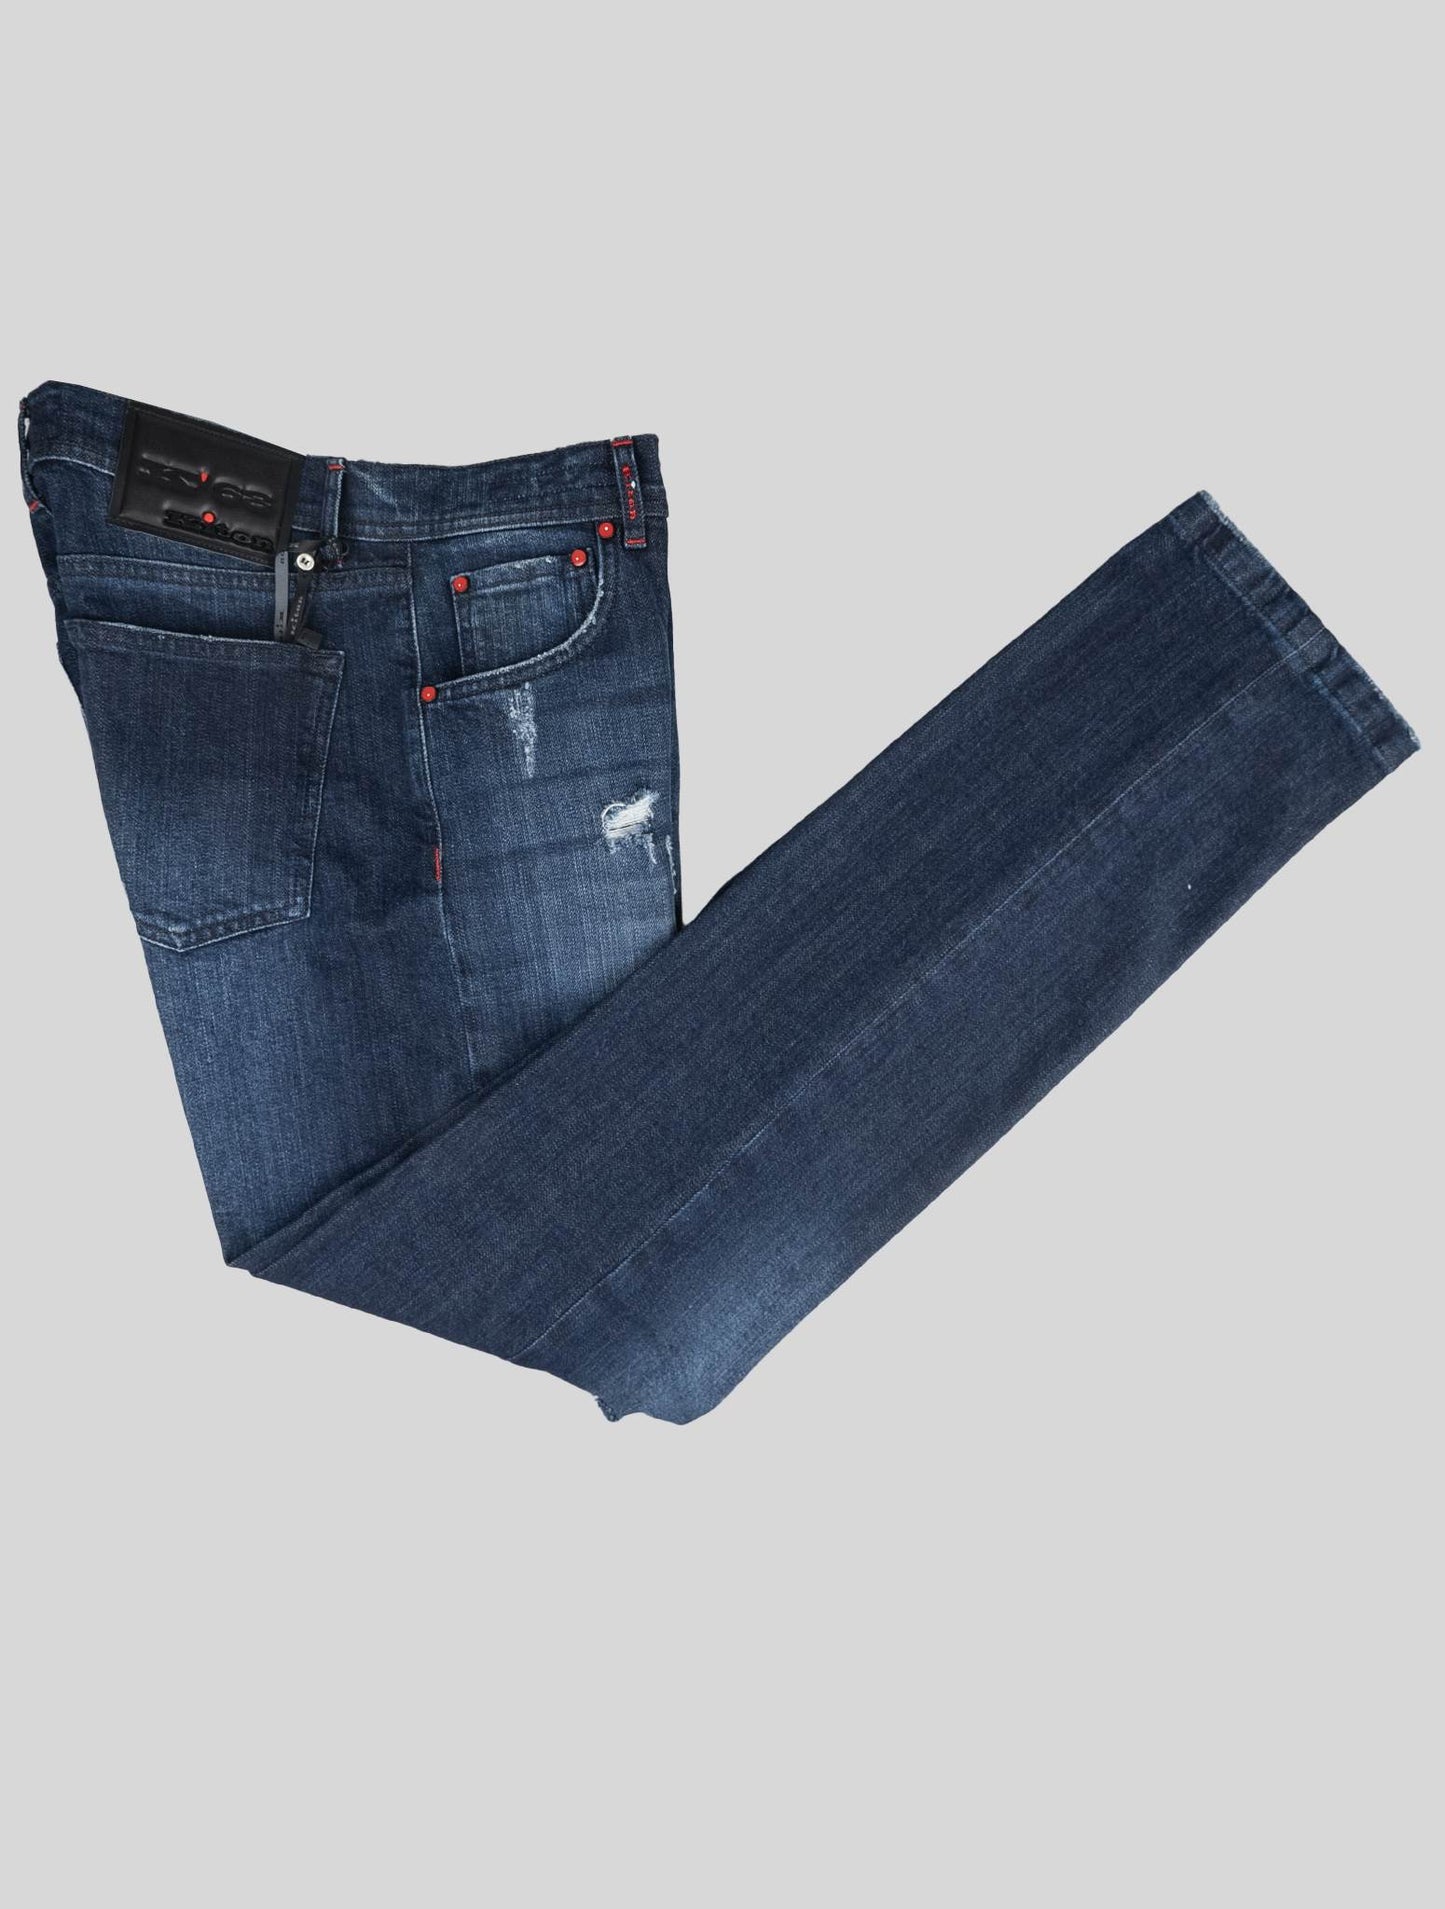 Kiton Blue Cotton Ea Jeans Limited Edition 08 of 22